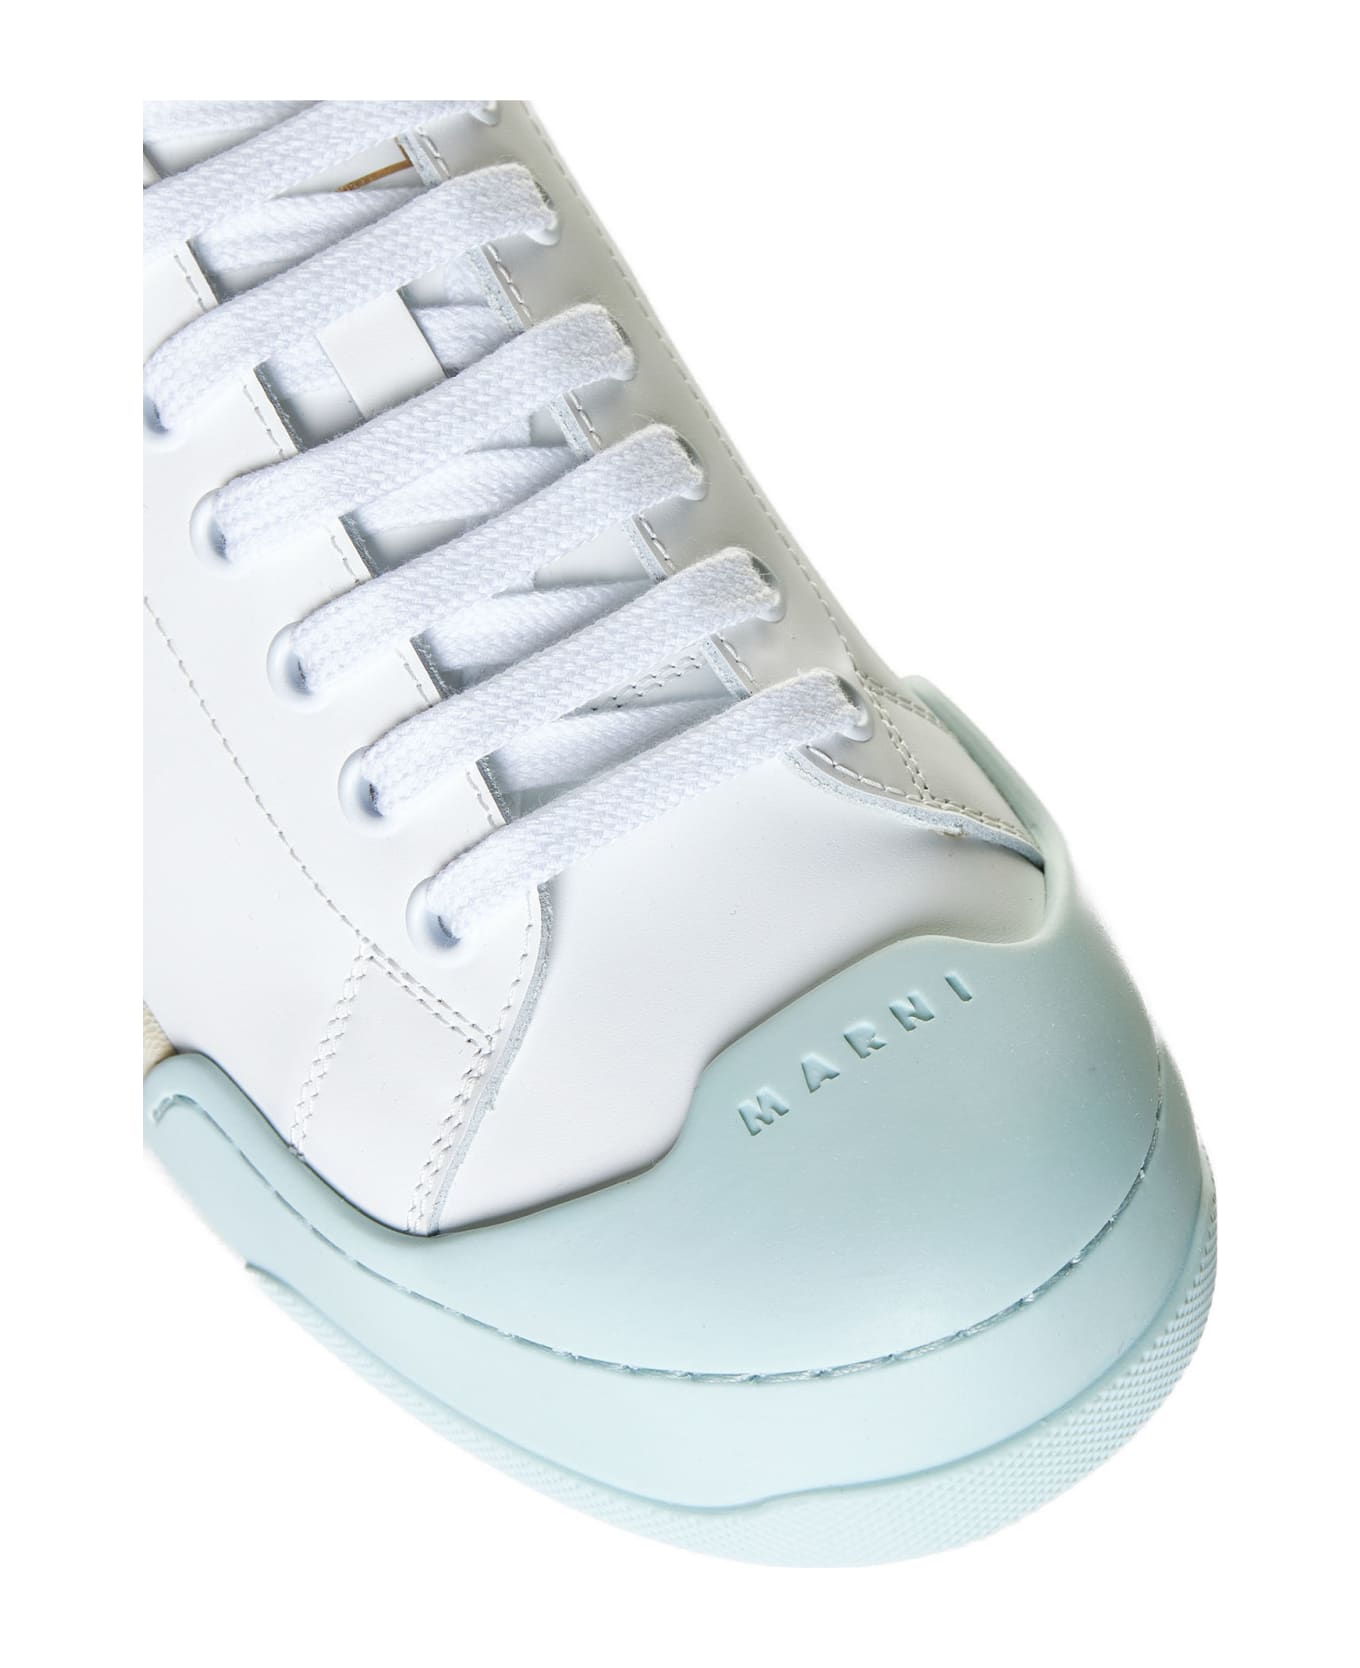 Marni Sneakers - Lily white/mineral ice スニーカー